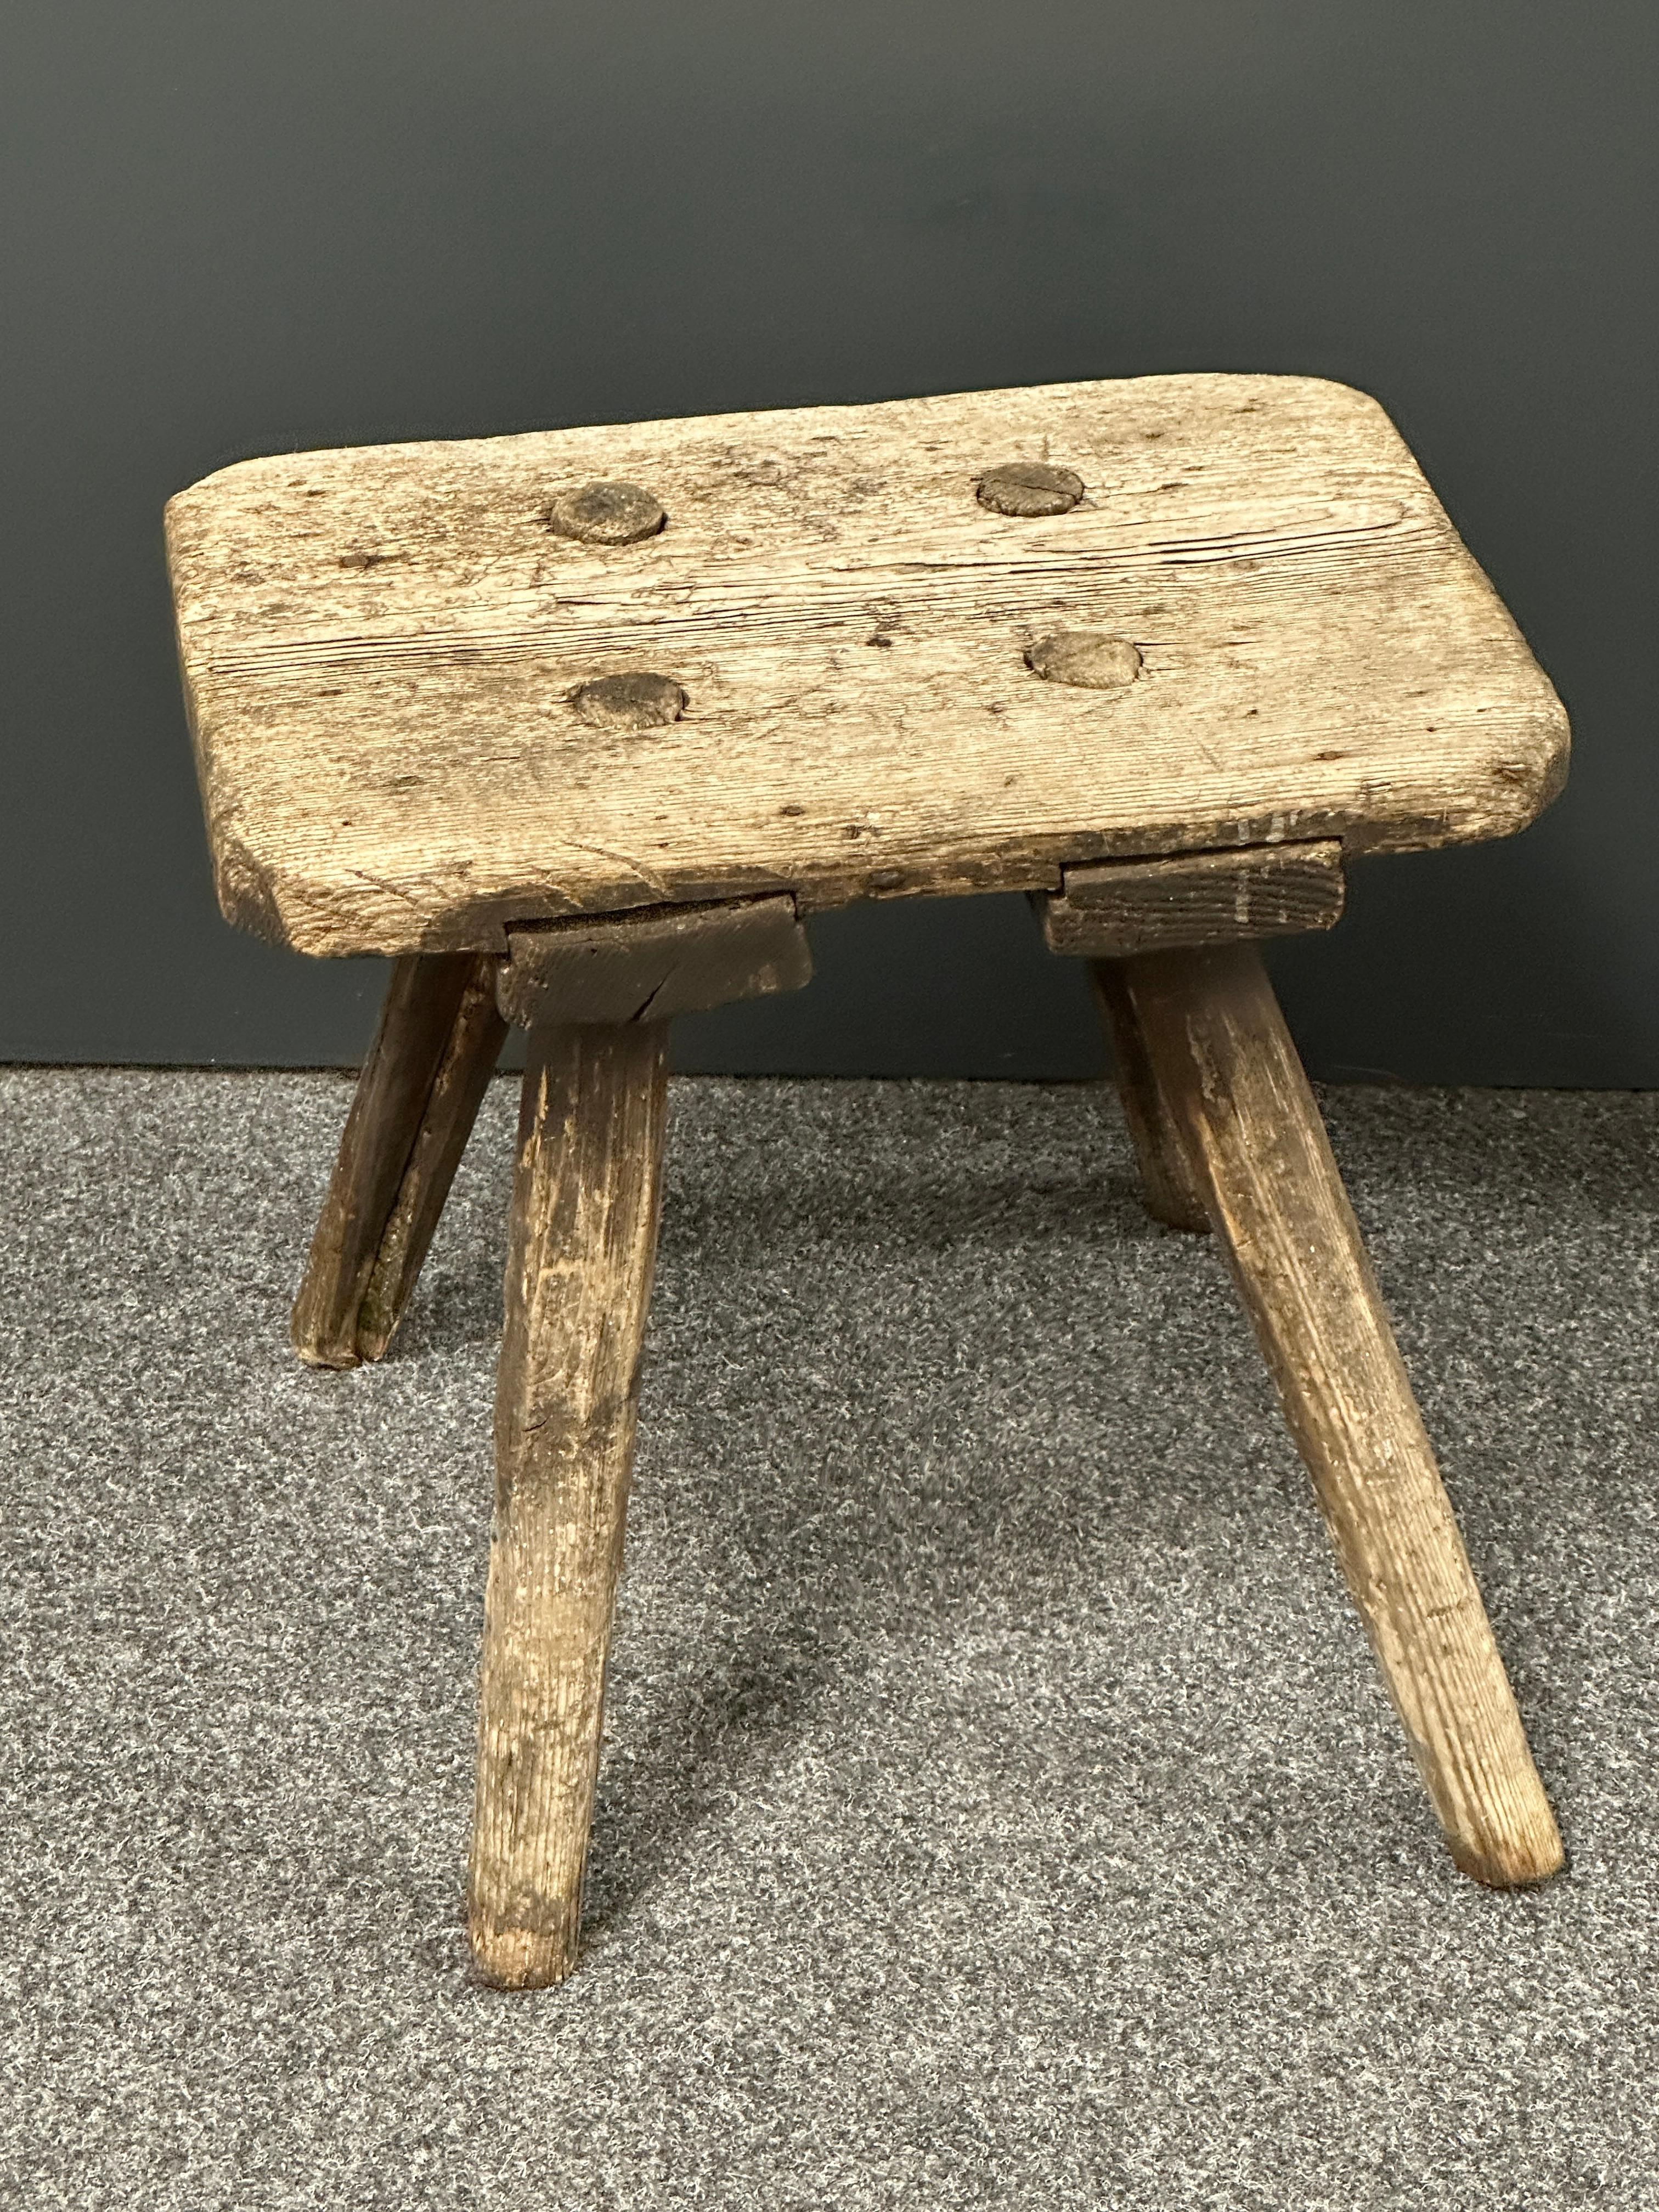 This 219th century wabi sabi 4 leg milking stool from Germany is an excellent example of this style. The piece has a square, rustic-looking seat made of wooden planks and is supported by four spindle legs. The stool has a simple, understated design